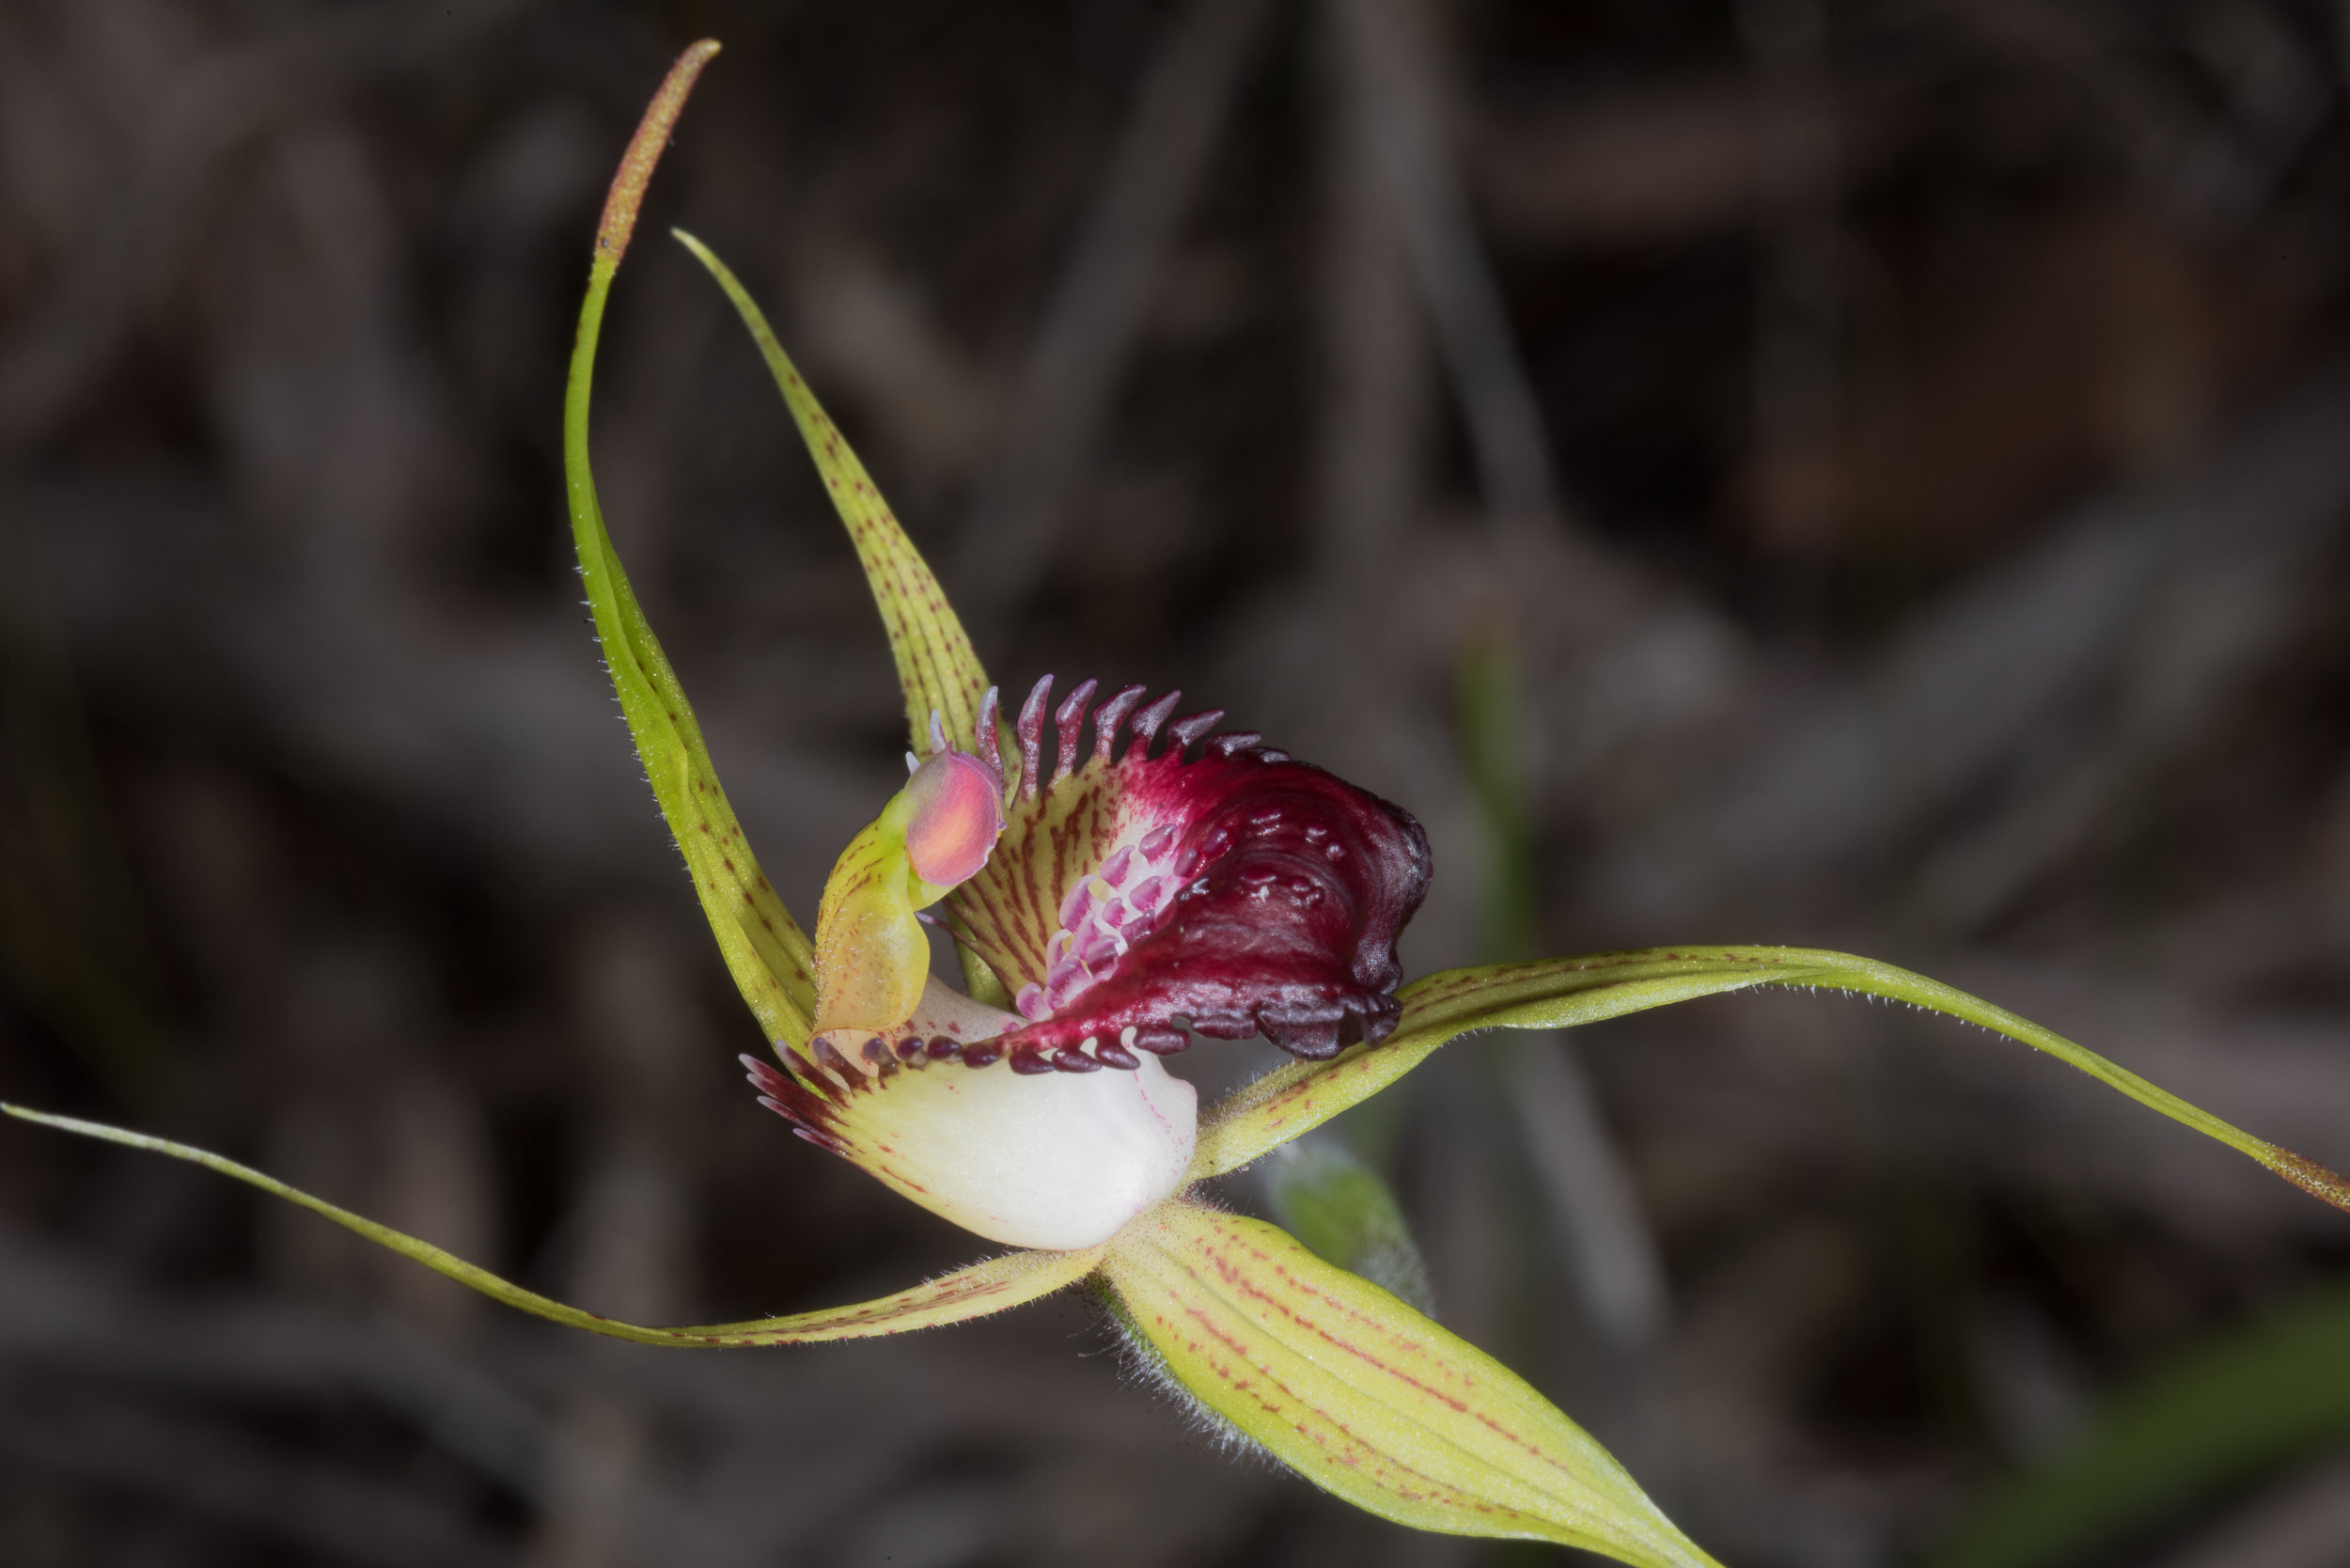  Caladenia paludosa – Swamp Spider Orchid, Bunker Bay Road 